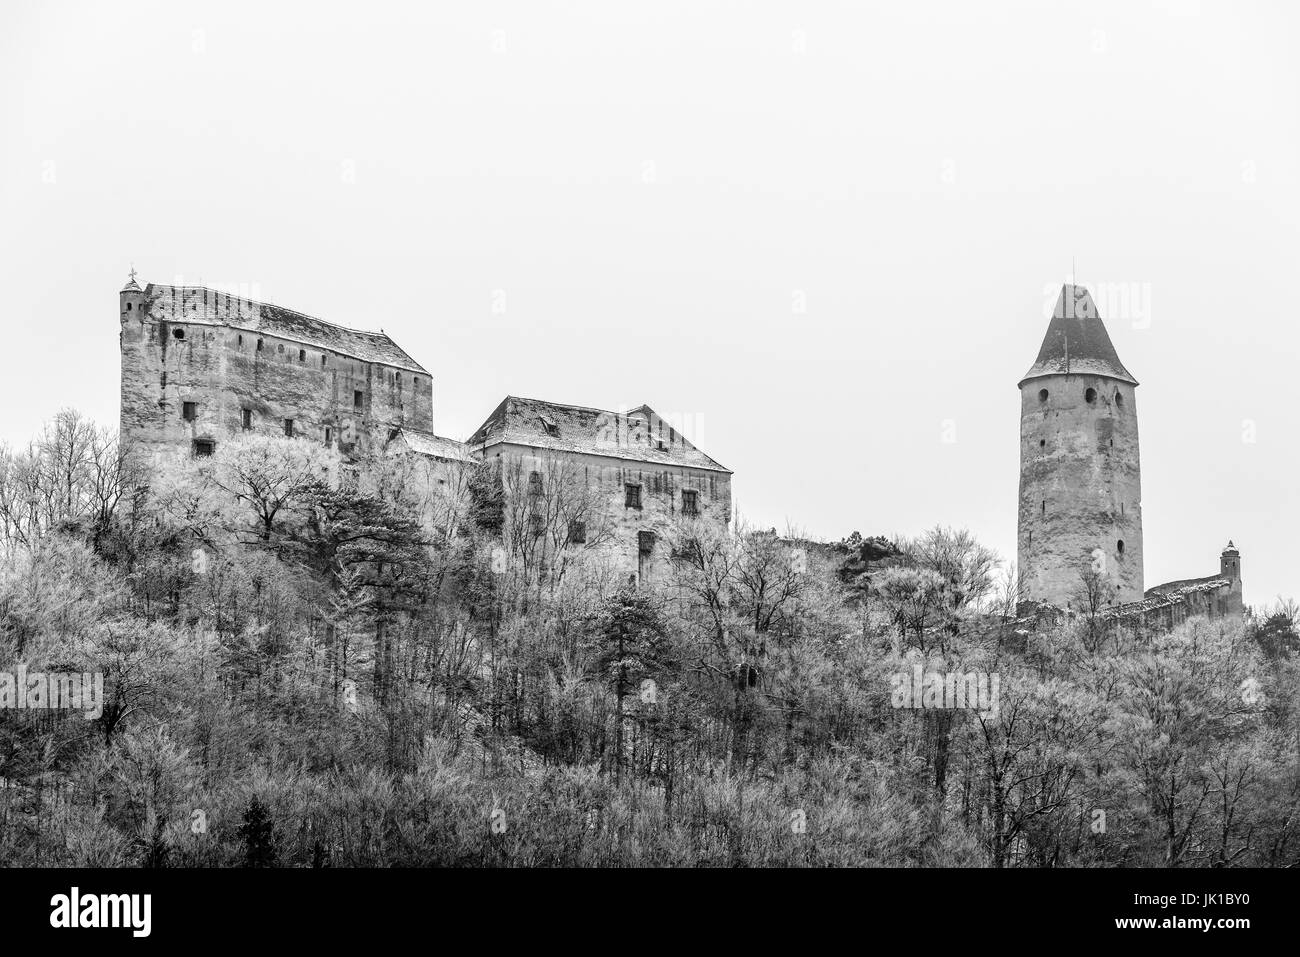 Outdoor scenic monochrome black and white image of medieval castle Seebenstein, Austria, on cold winter day with snow and hoar frost Stock Photo